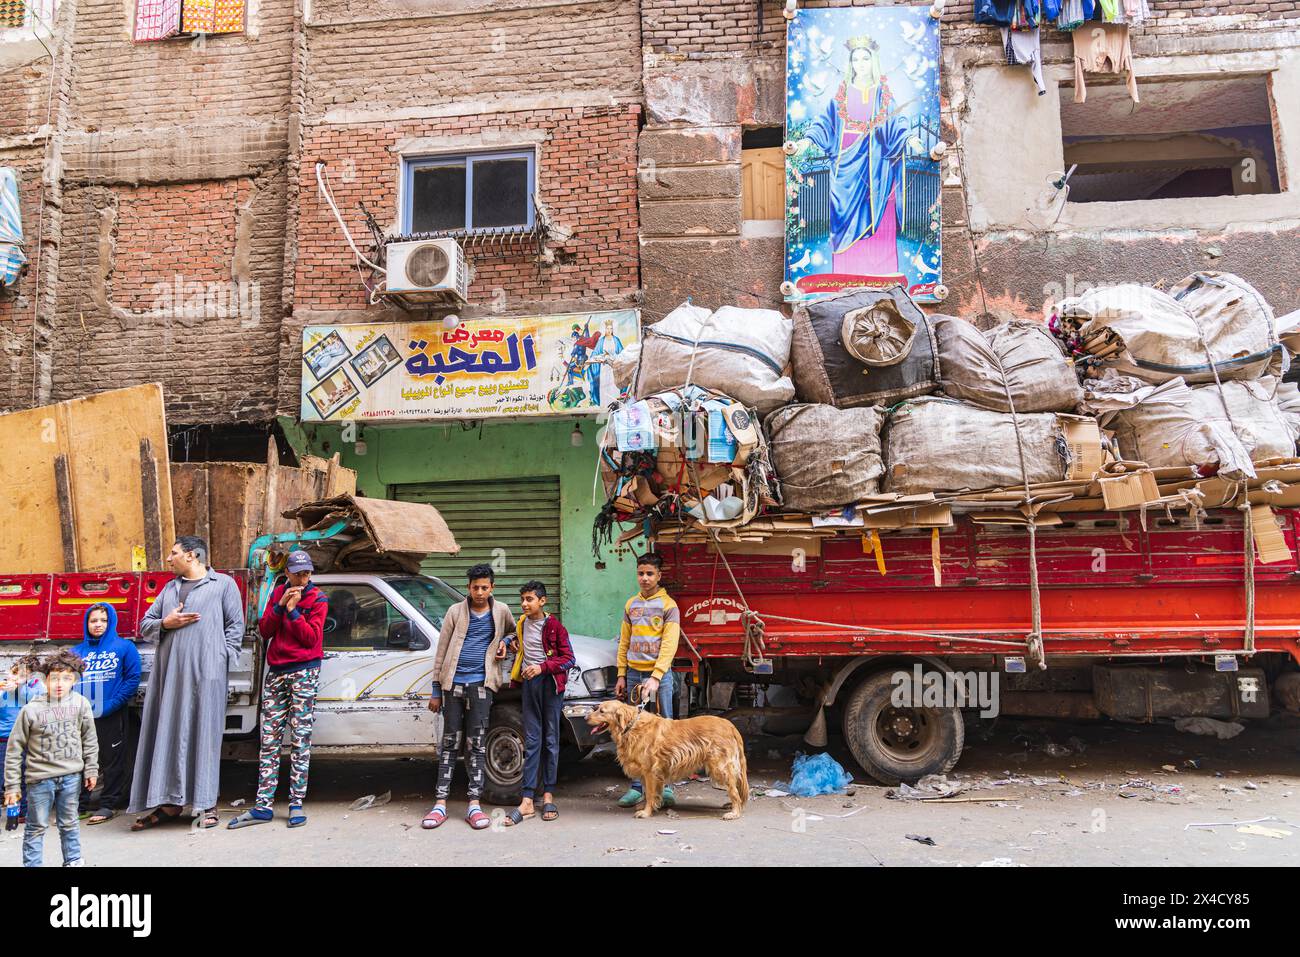 Manshiyat Naser, Garbage City, Cairo, Egypt. A truck loaded with recycled materials. (Editorial Use Only) Stock Photo